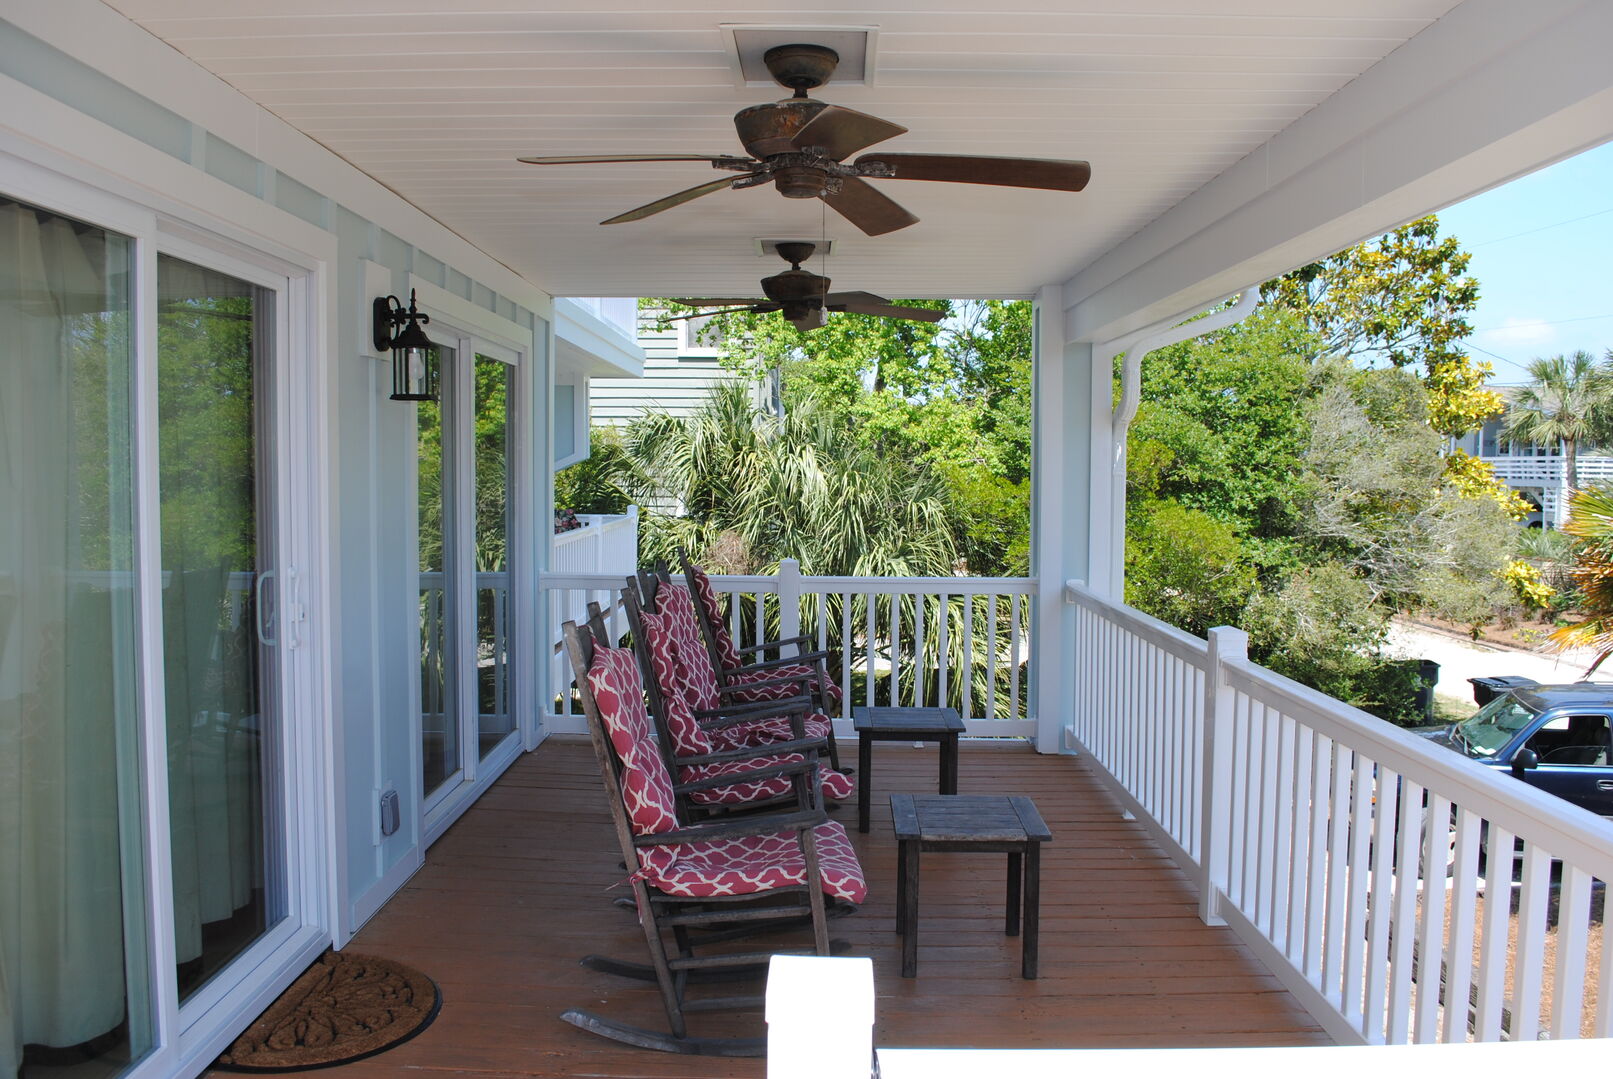 Covered Porch - First Floor